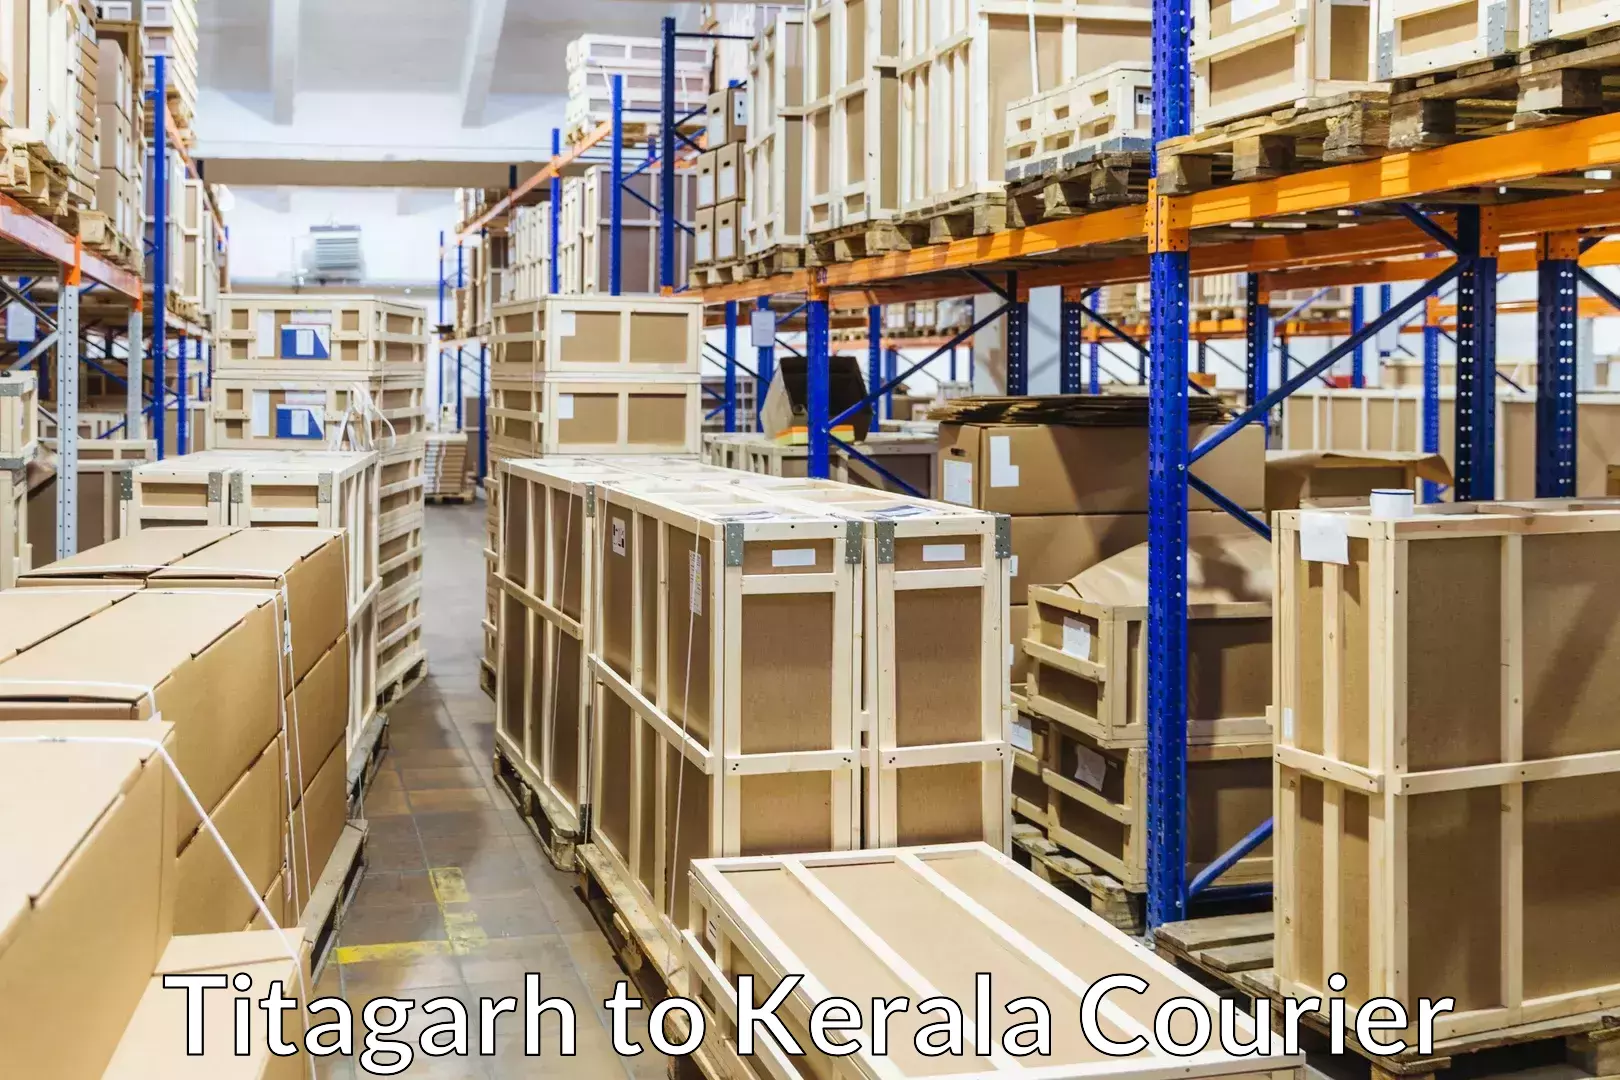 Efficient packing and moving Titagarh to Kerala